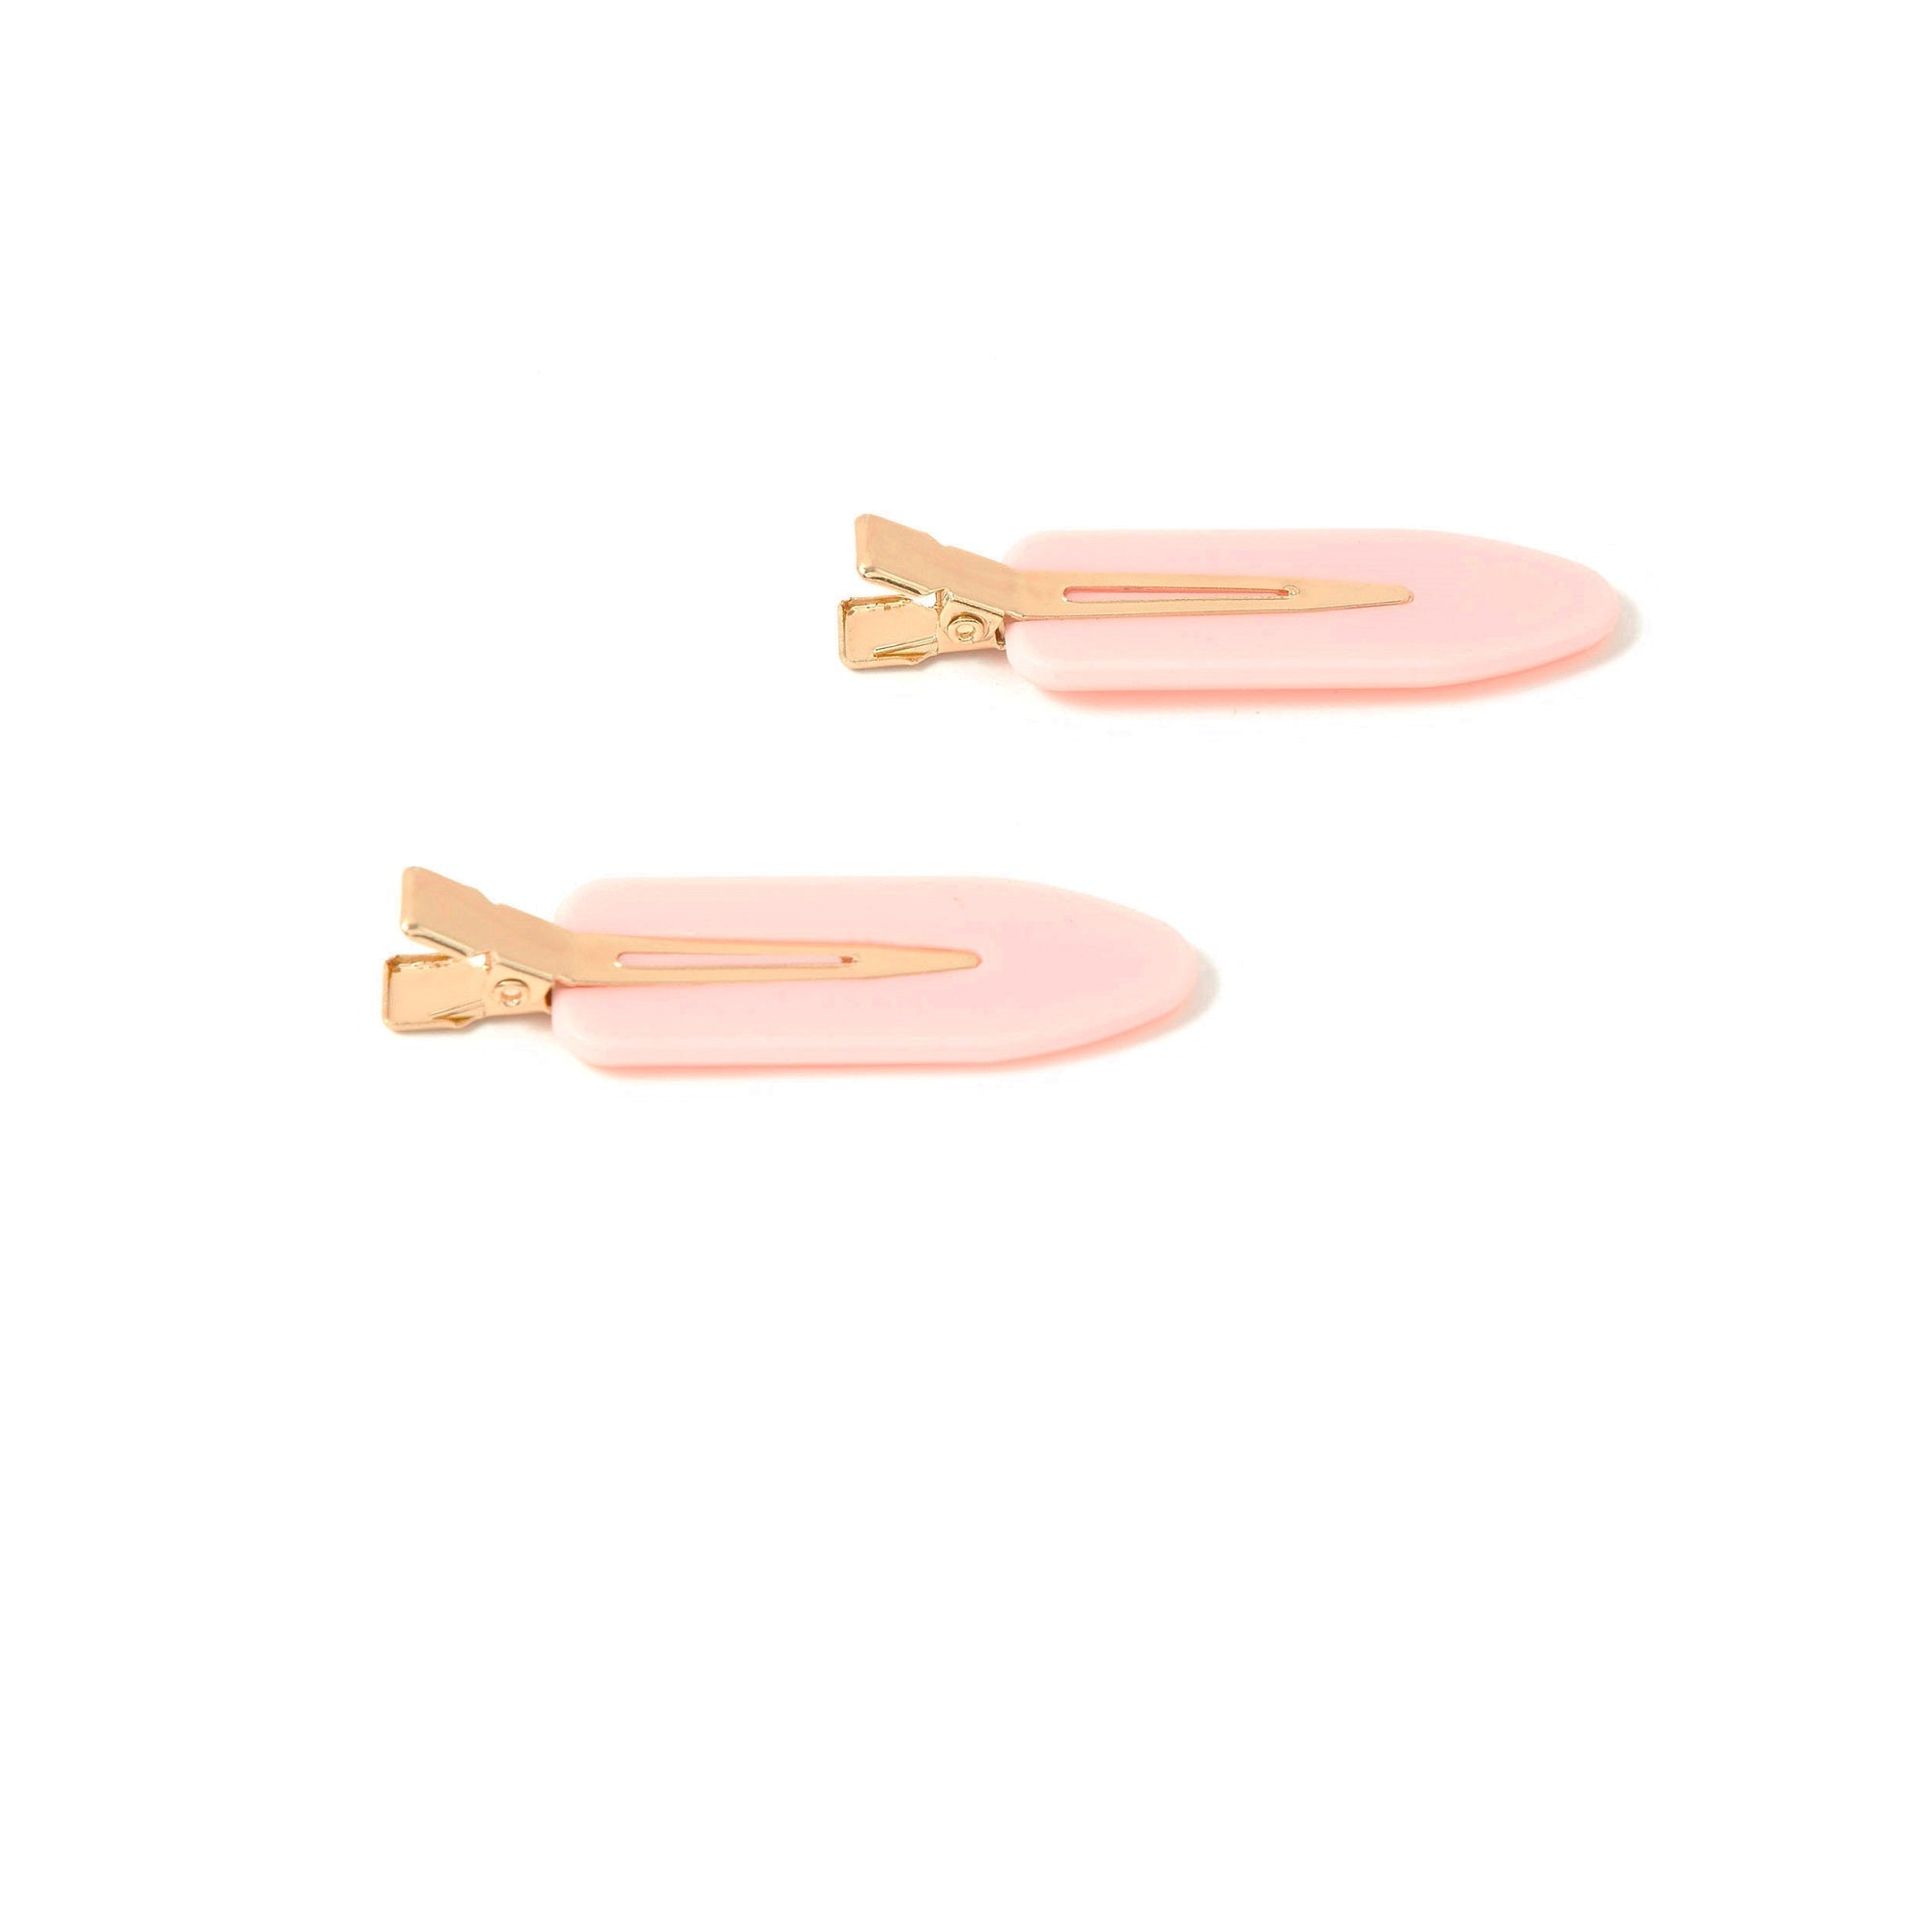 Accessorize London Women's 2 Pack 90S Clips - Pink/Gold